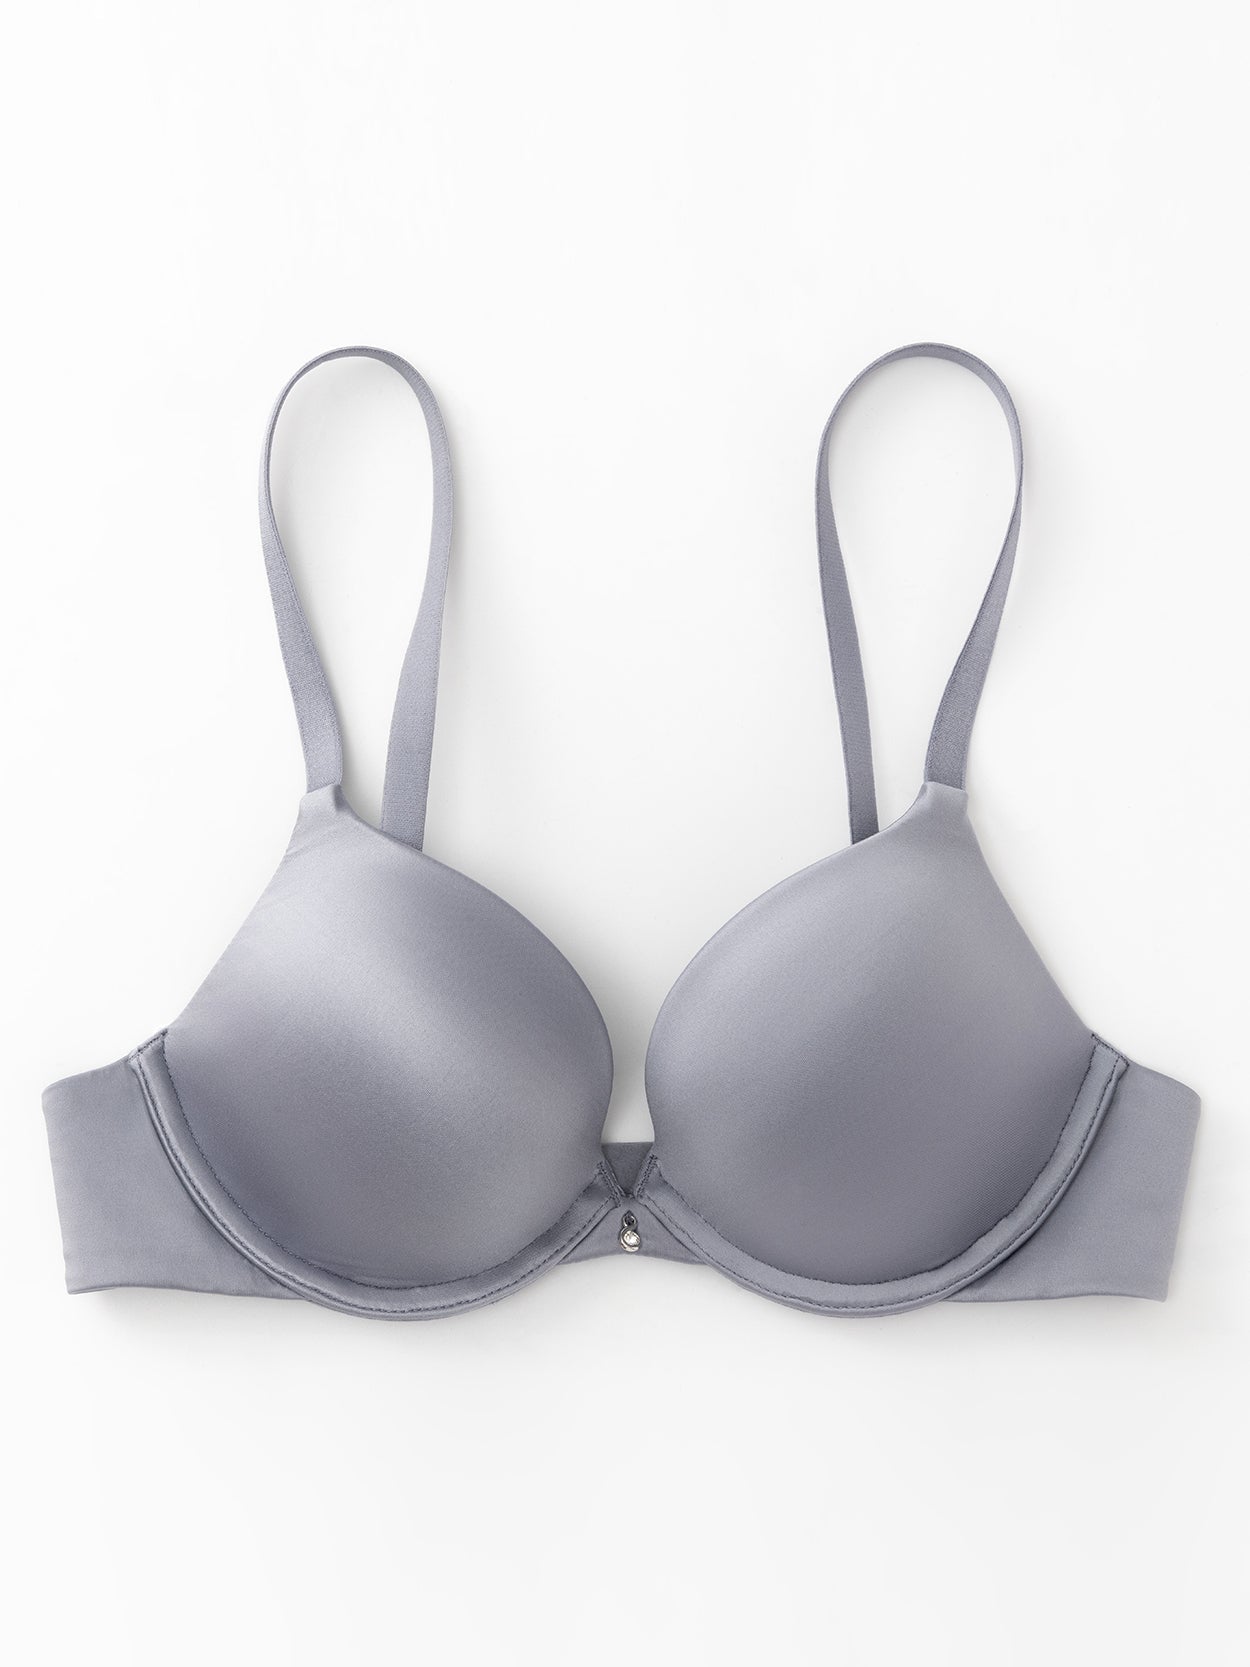 Eashery Women'S Bras Underwire Demi Bra, Push-Up Bra with Wonderbra  Technology, Smoothing Lace-Trim Bra with Push-Up Cups Grey 44